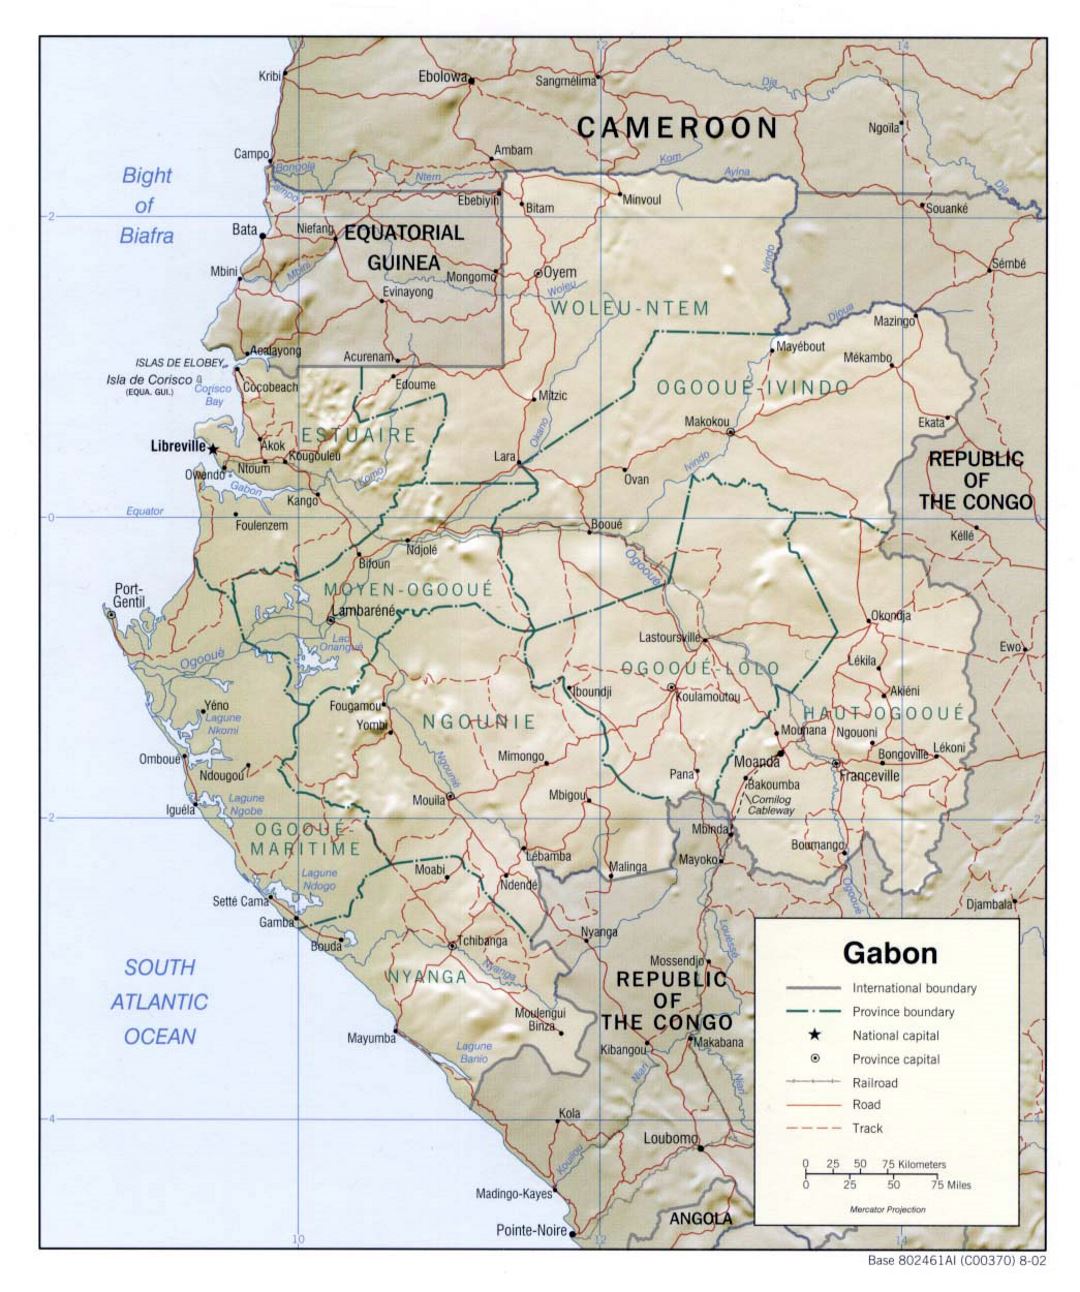 Detailed political and administrative map of Gabon with relief, roads, railroads and major cities - 2002